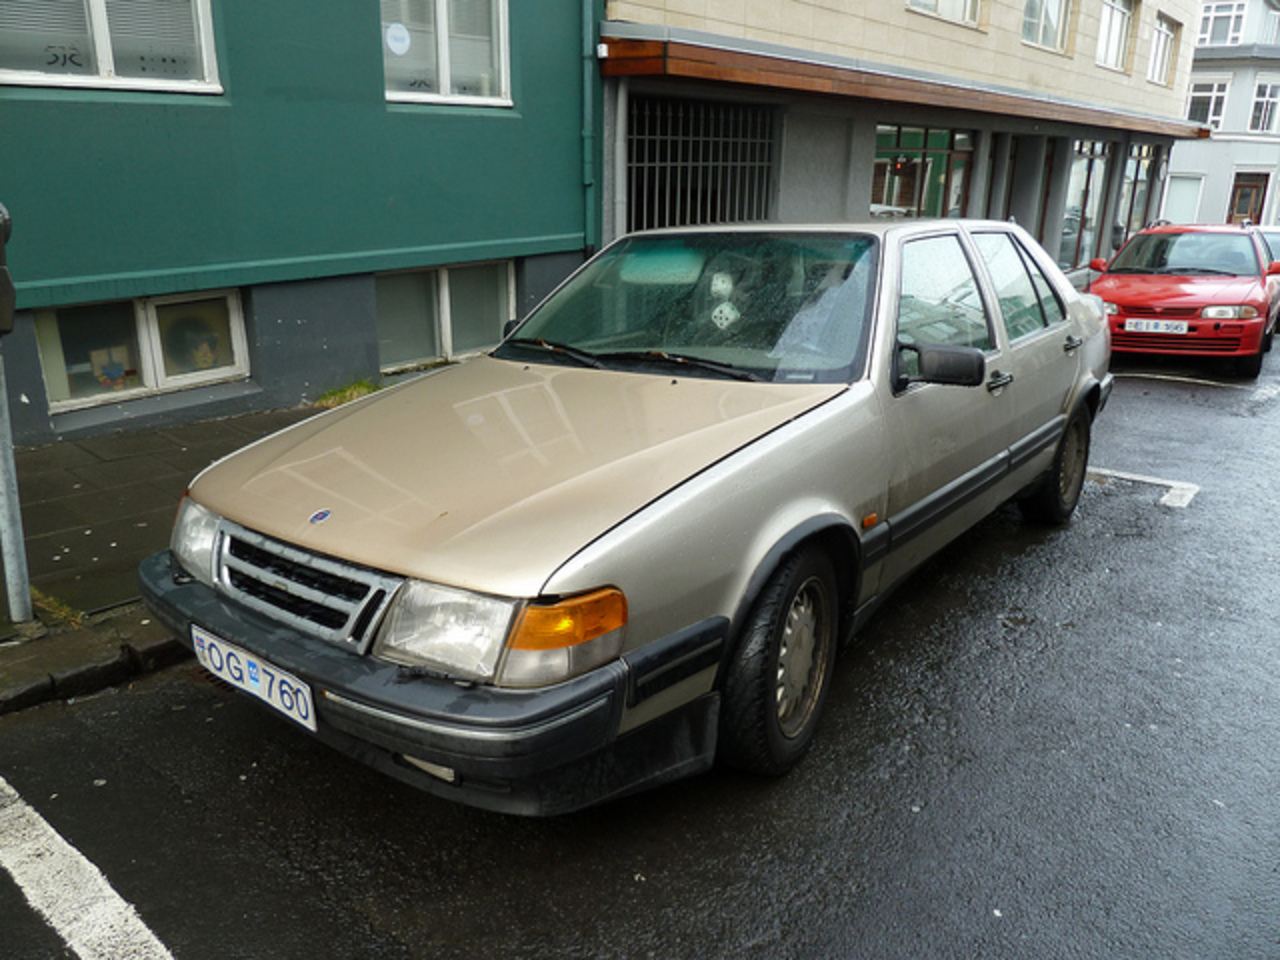 Saab 9000 CDE, silver with gold bonnet/hood | Flickr - Photo Sharing!